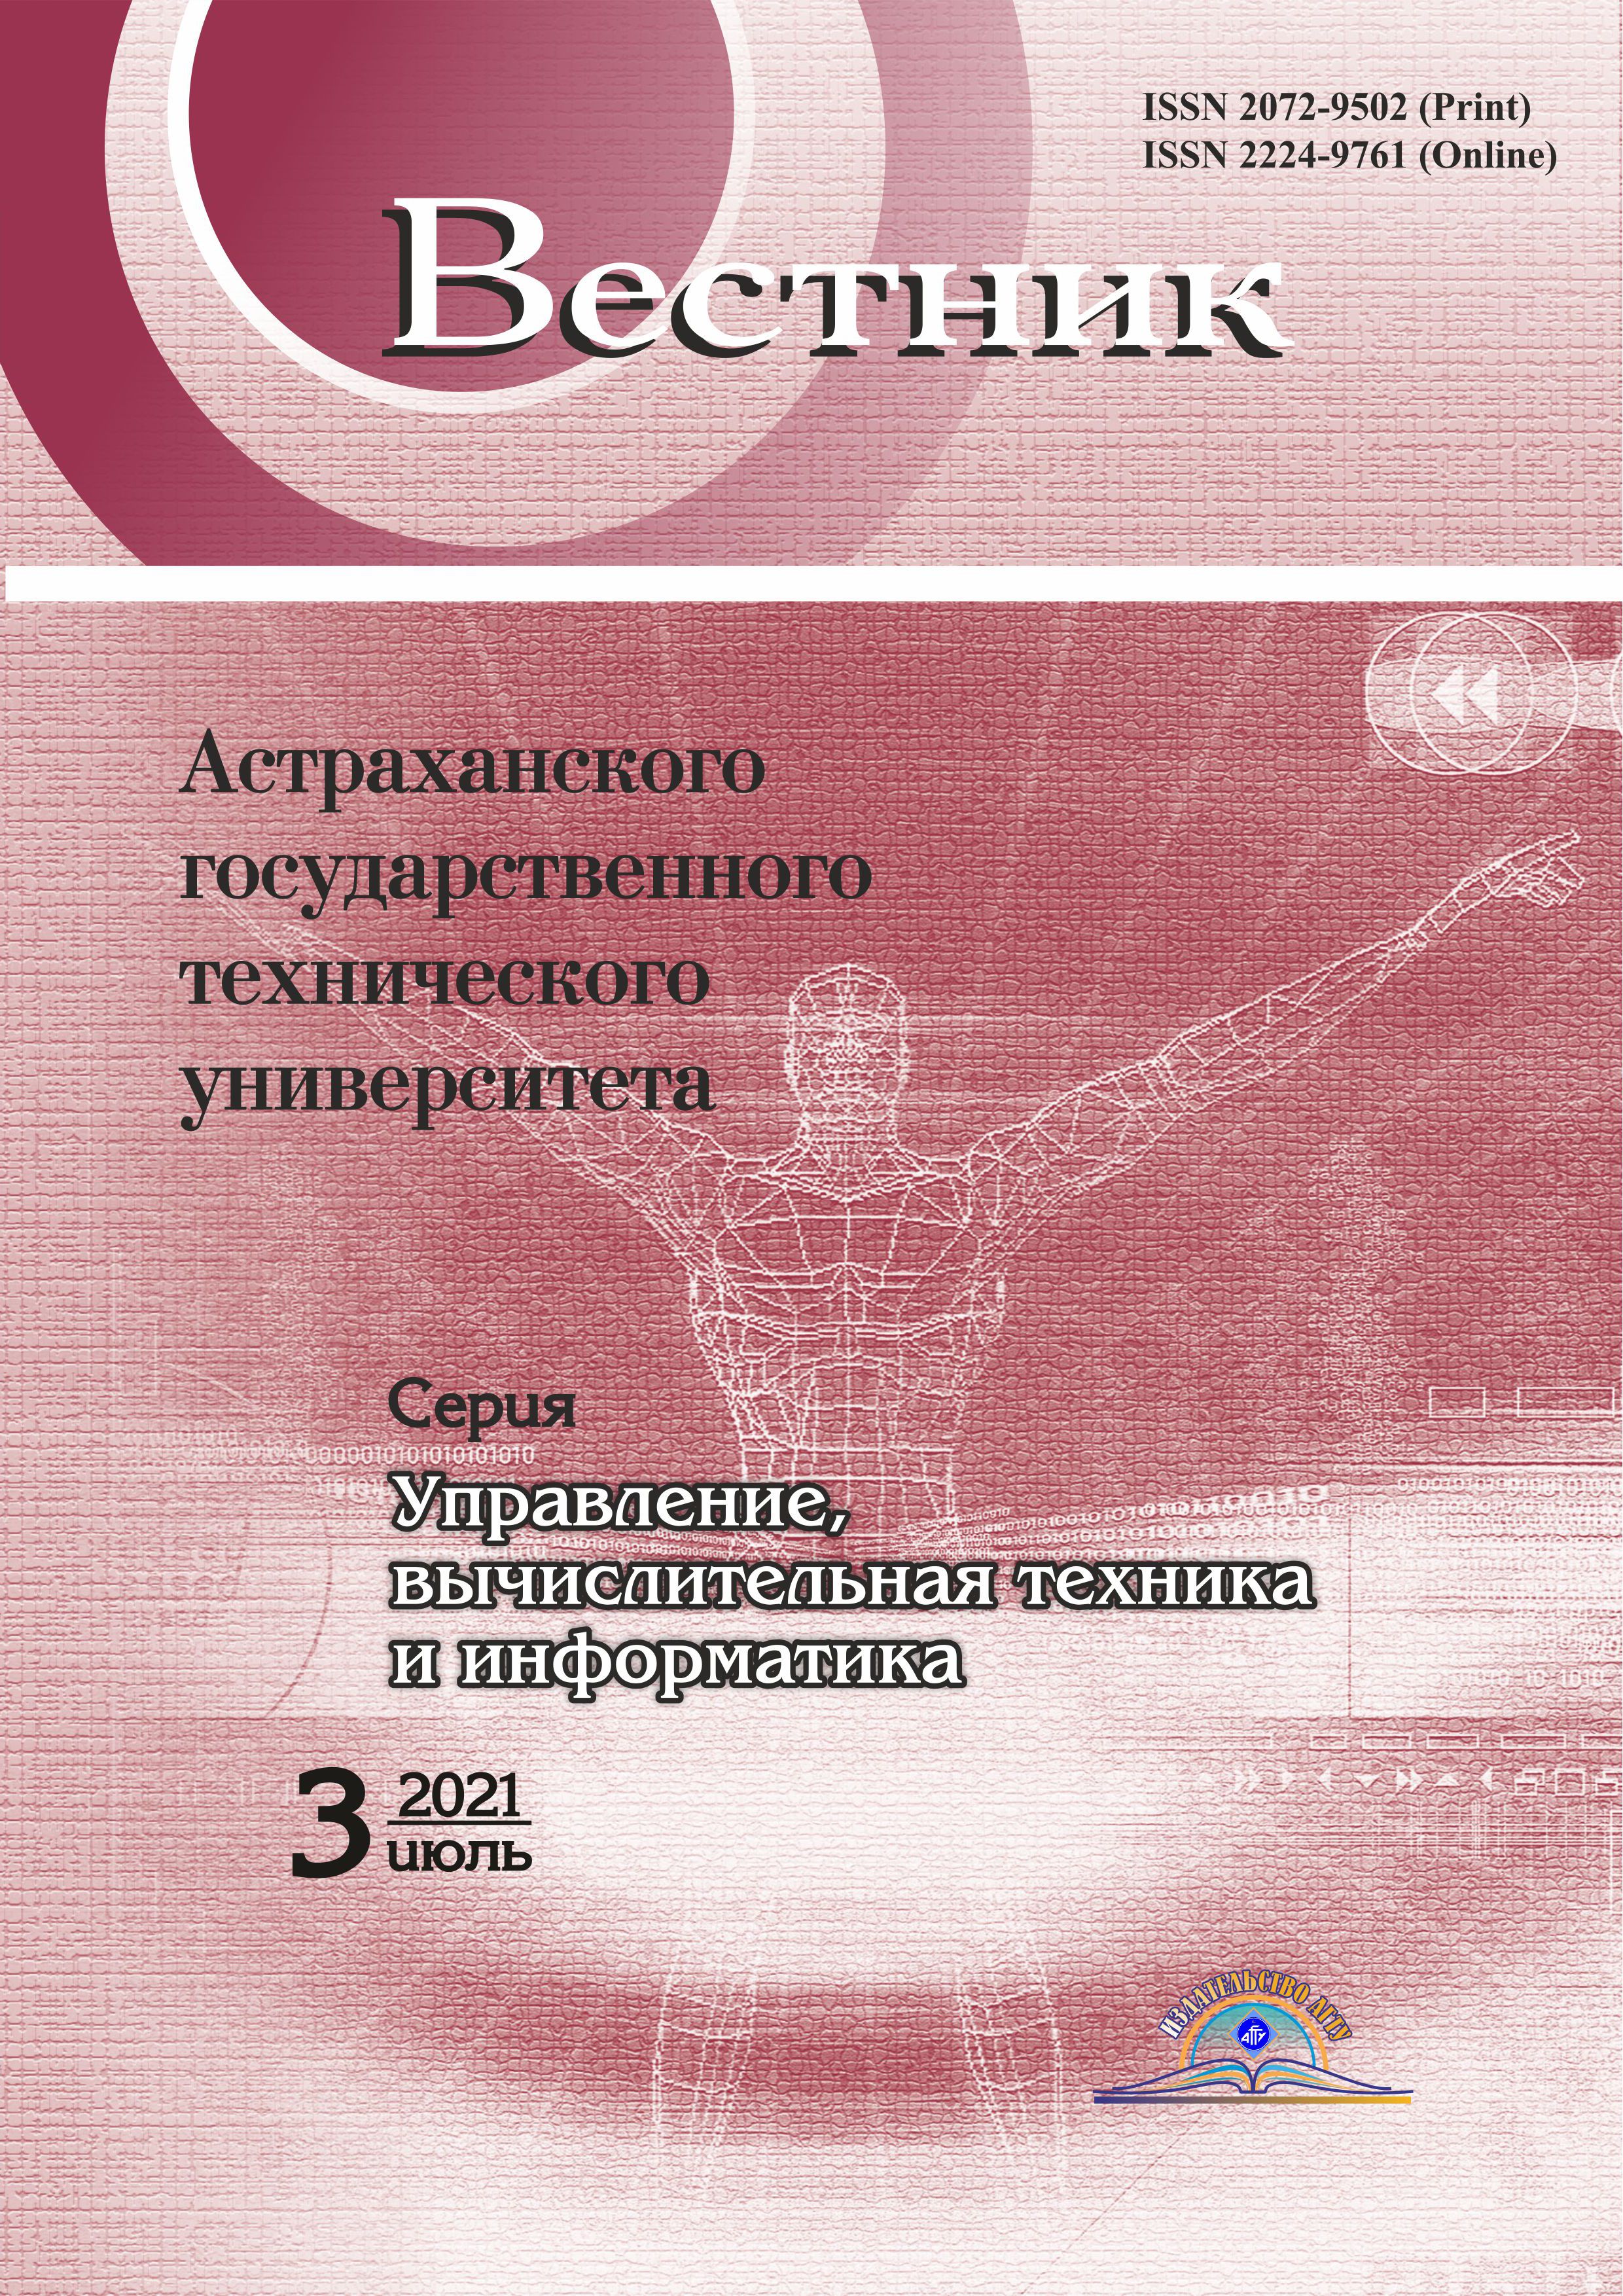                         ALGORITHMS FOR EXAMINATION AND VERIFICATION  OF WORK PROGRAMS OF DISCIPLINES FOR USE  IN INFORMATION SYSTEMS
            